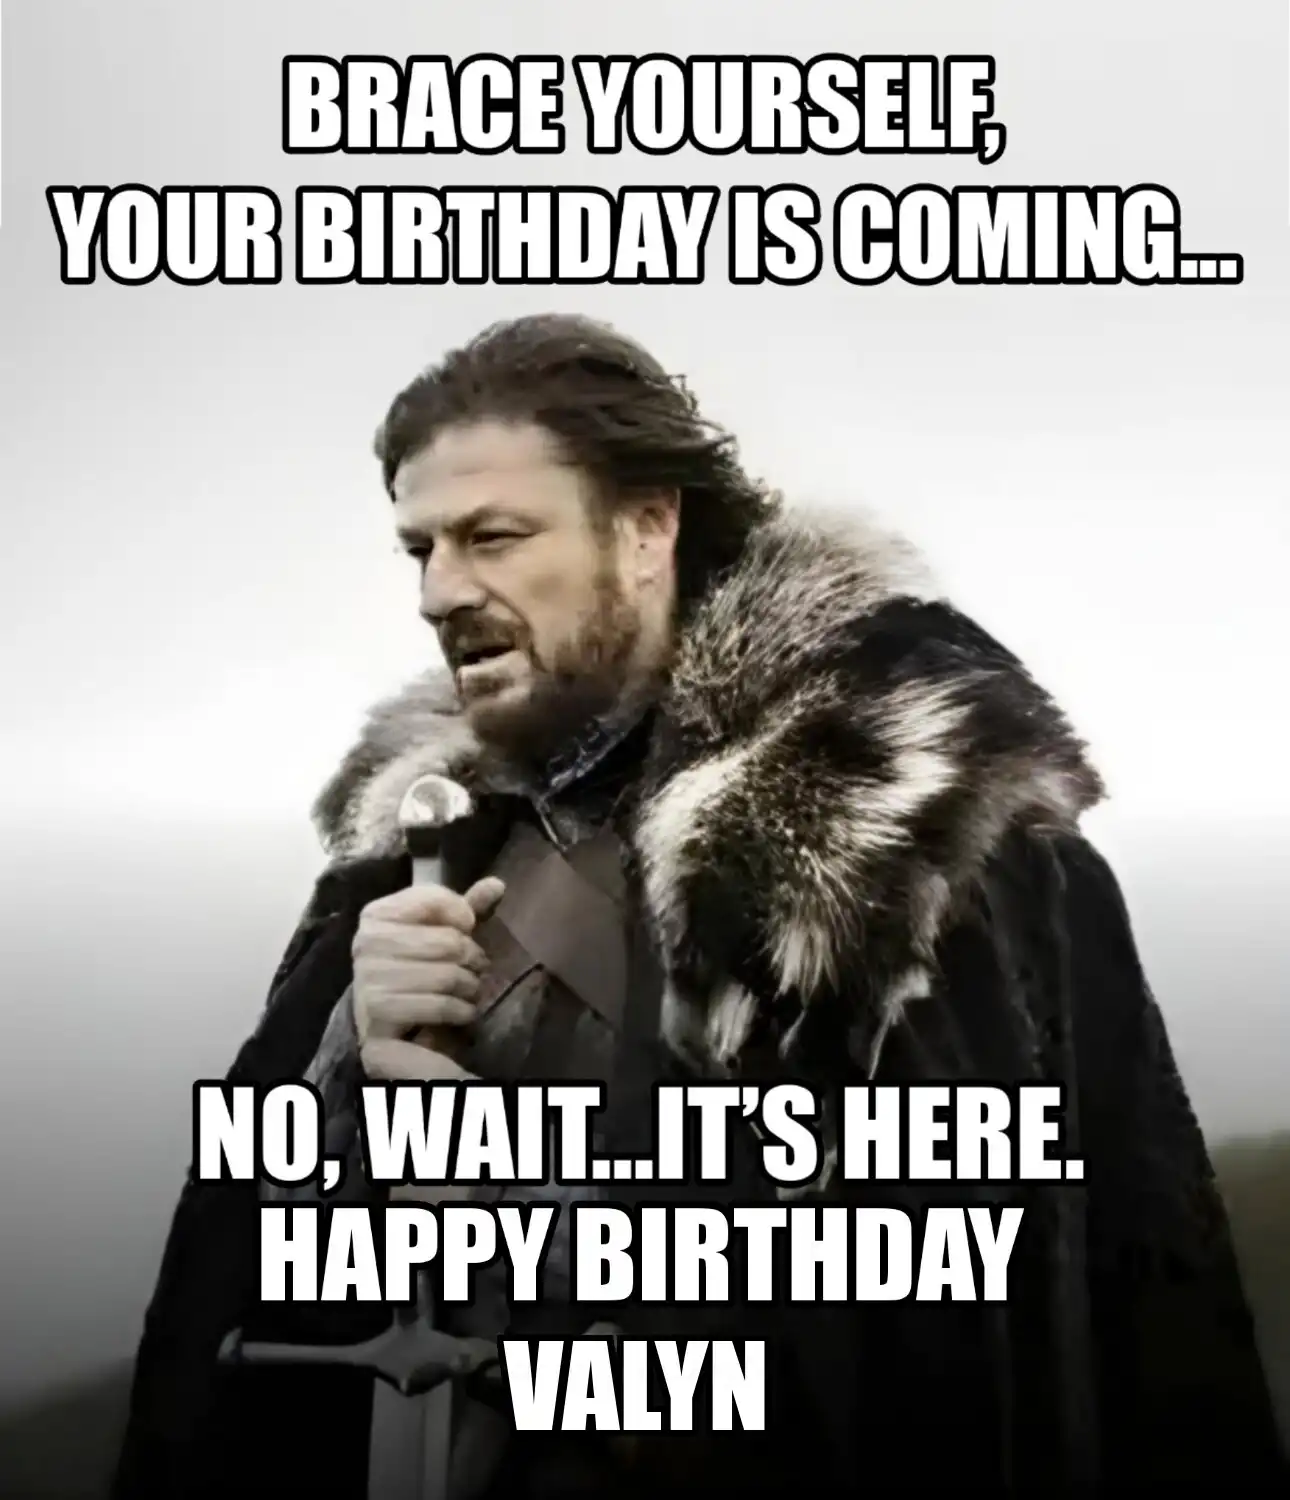 Happy Birthday Valyn Brace Yourself Your Birthday Is Coming Meme